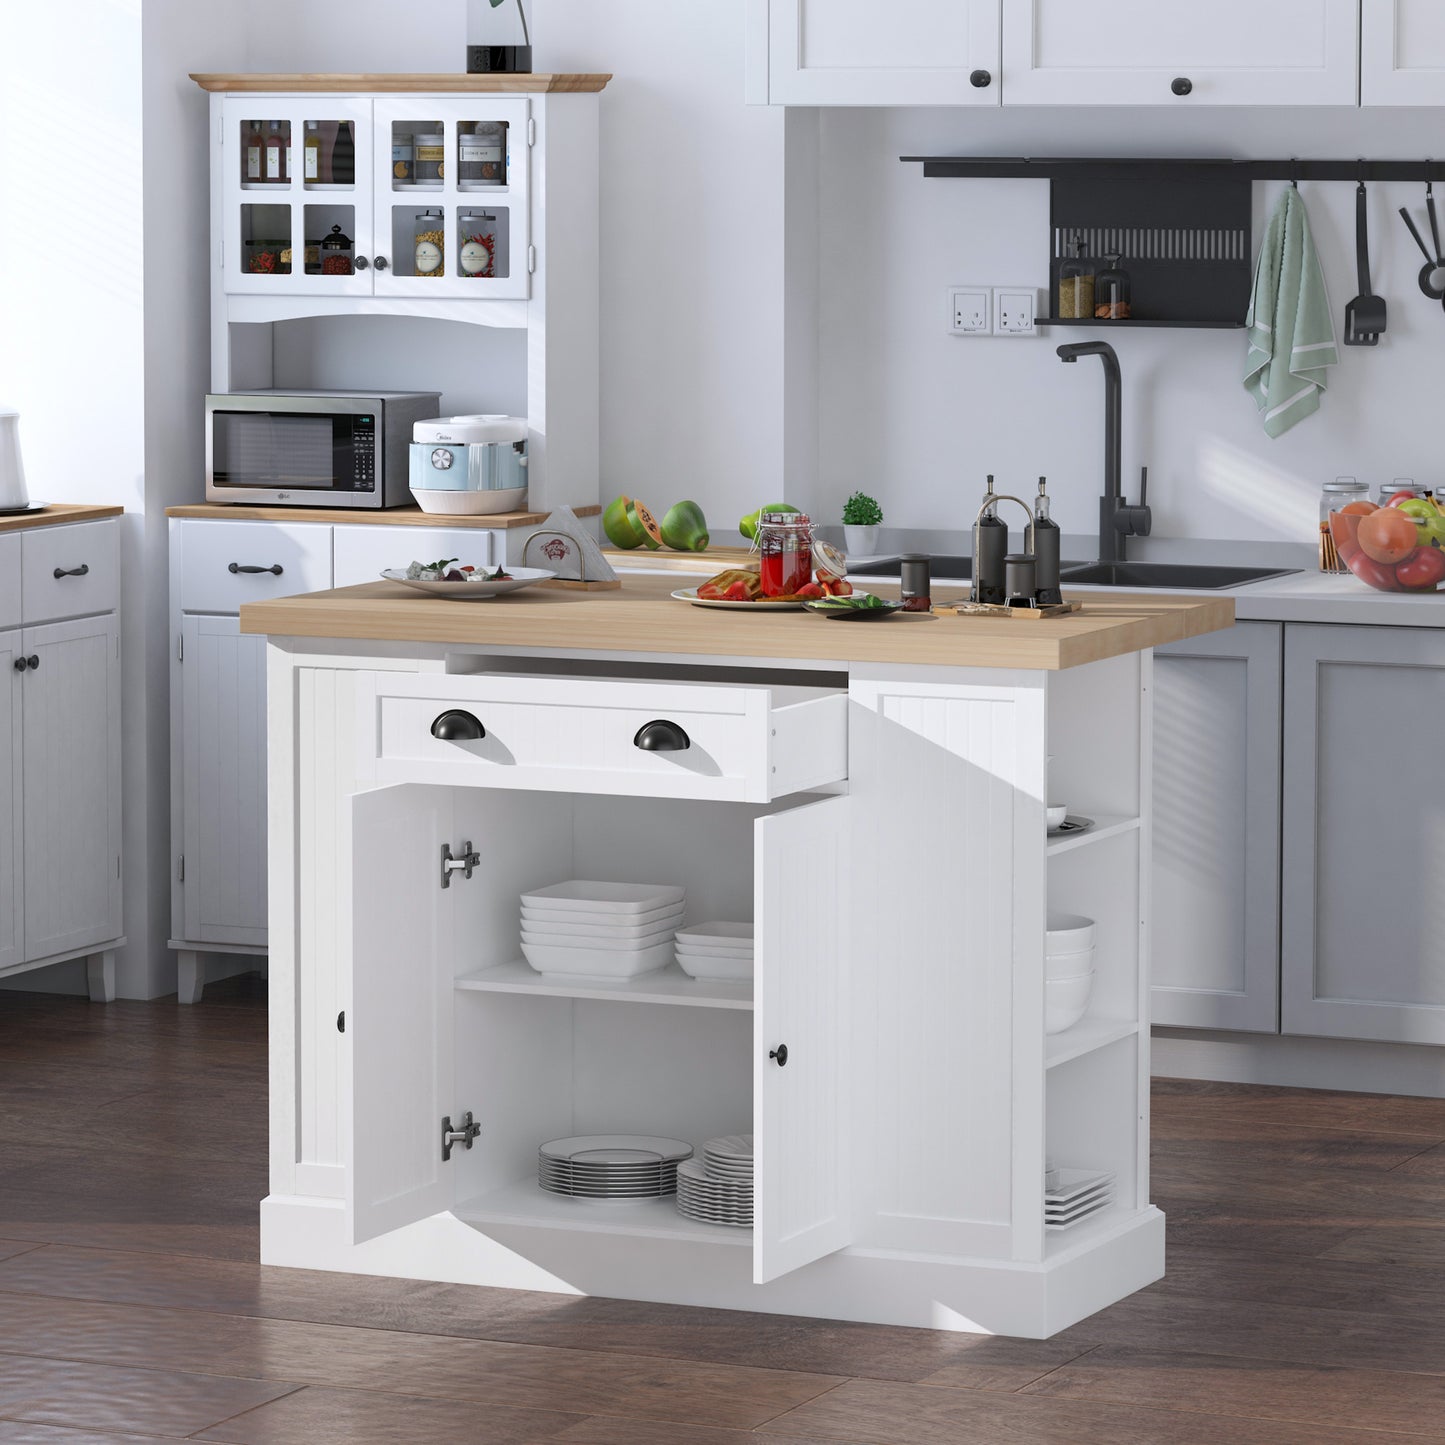 HOMCOM Freestanding Kitchen Island Cabinet, Wooden Kitchen Island Table with Drop Leaf, Fluted-Style Storage Cabinet with Adjustable Shelves, White